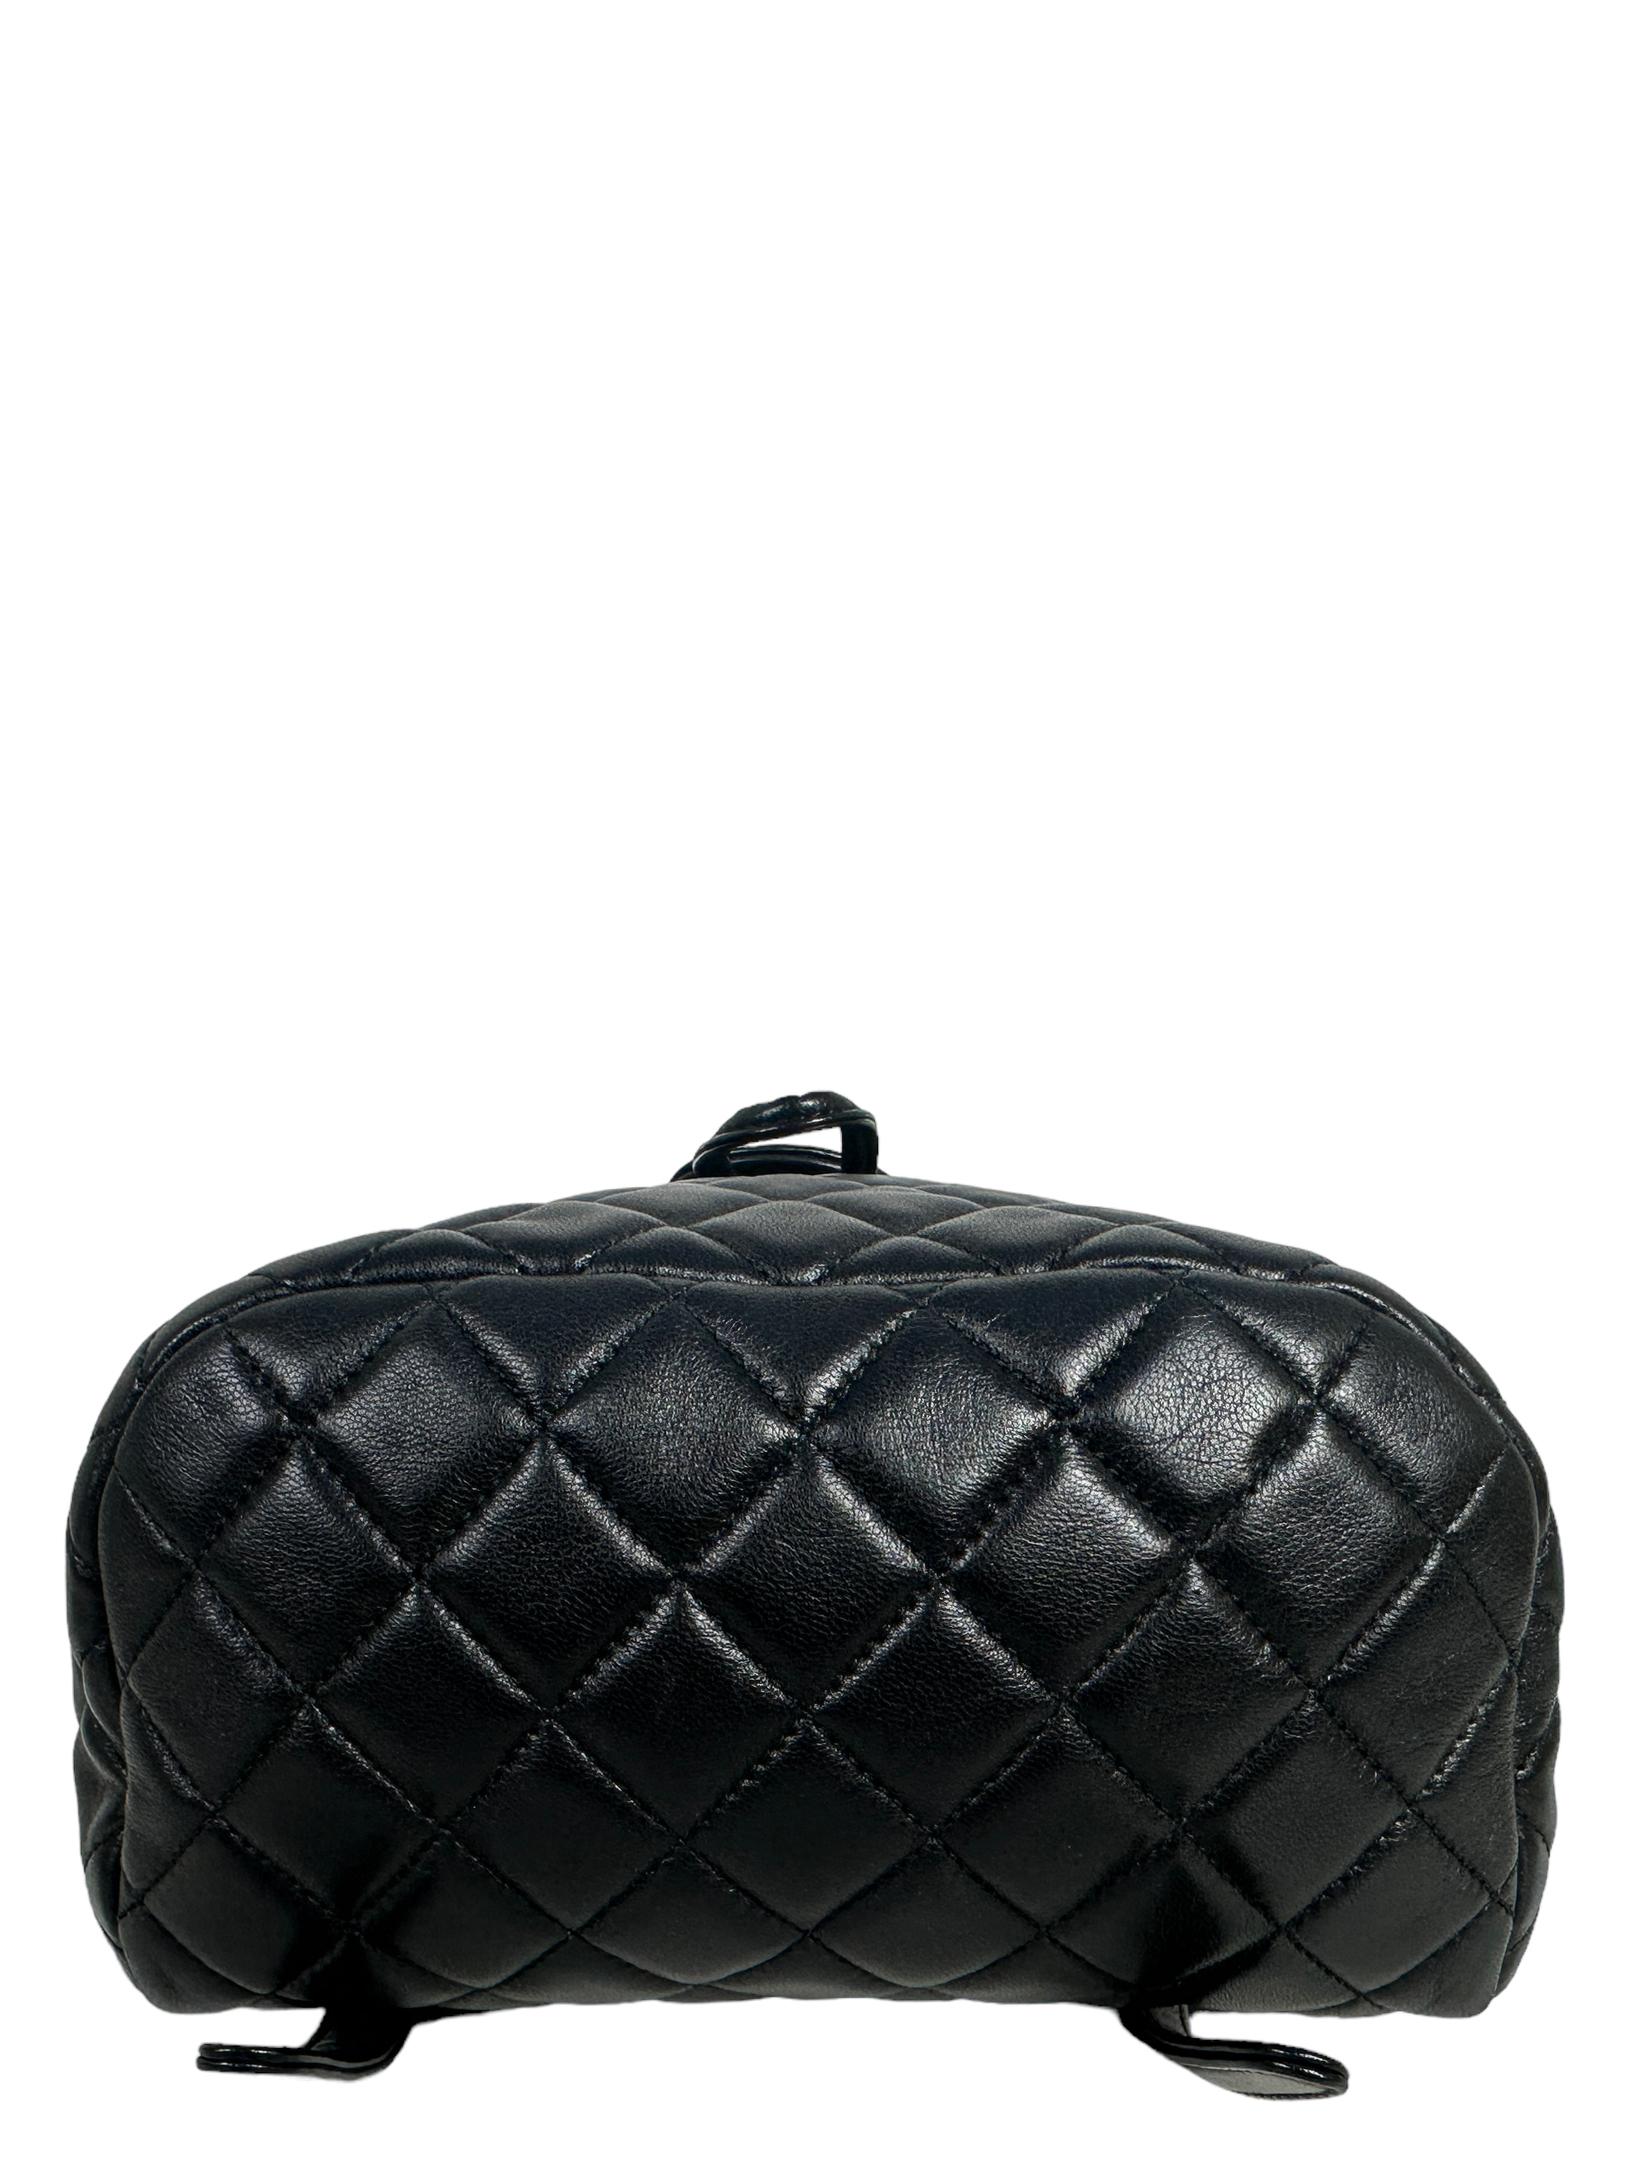 Chanel Black Lambskin Quilted Small Urban Spirit Backpack Bag 1